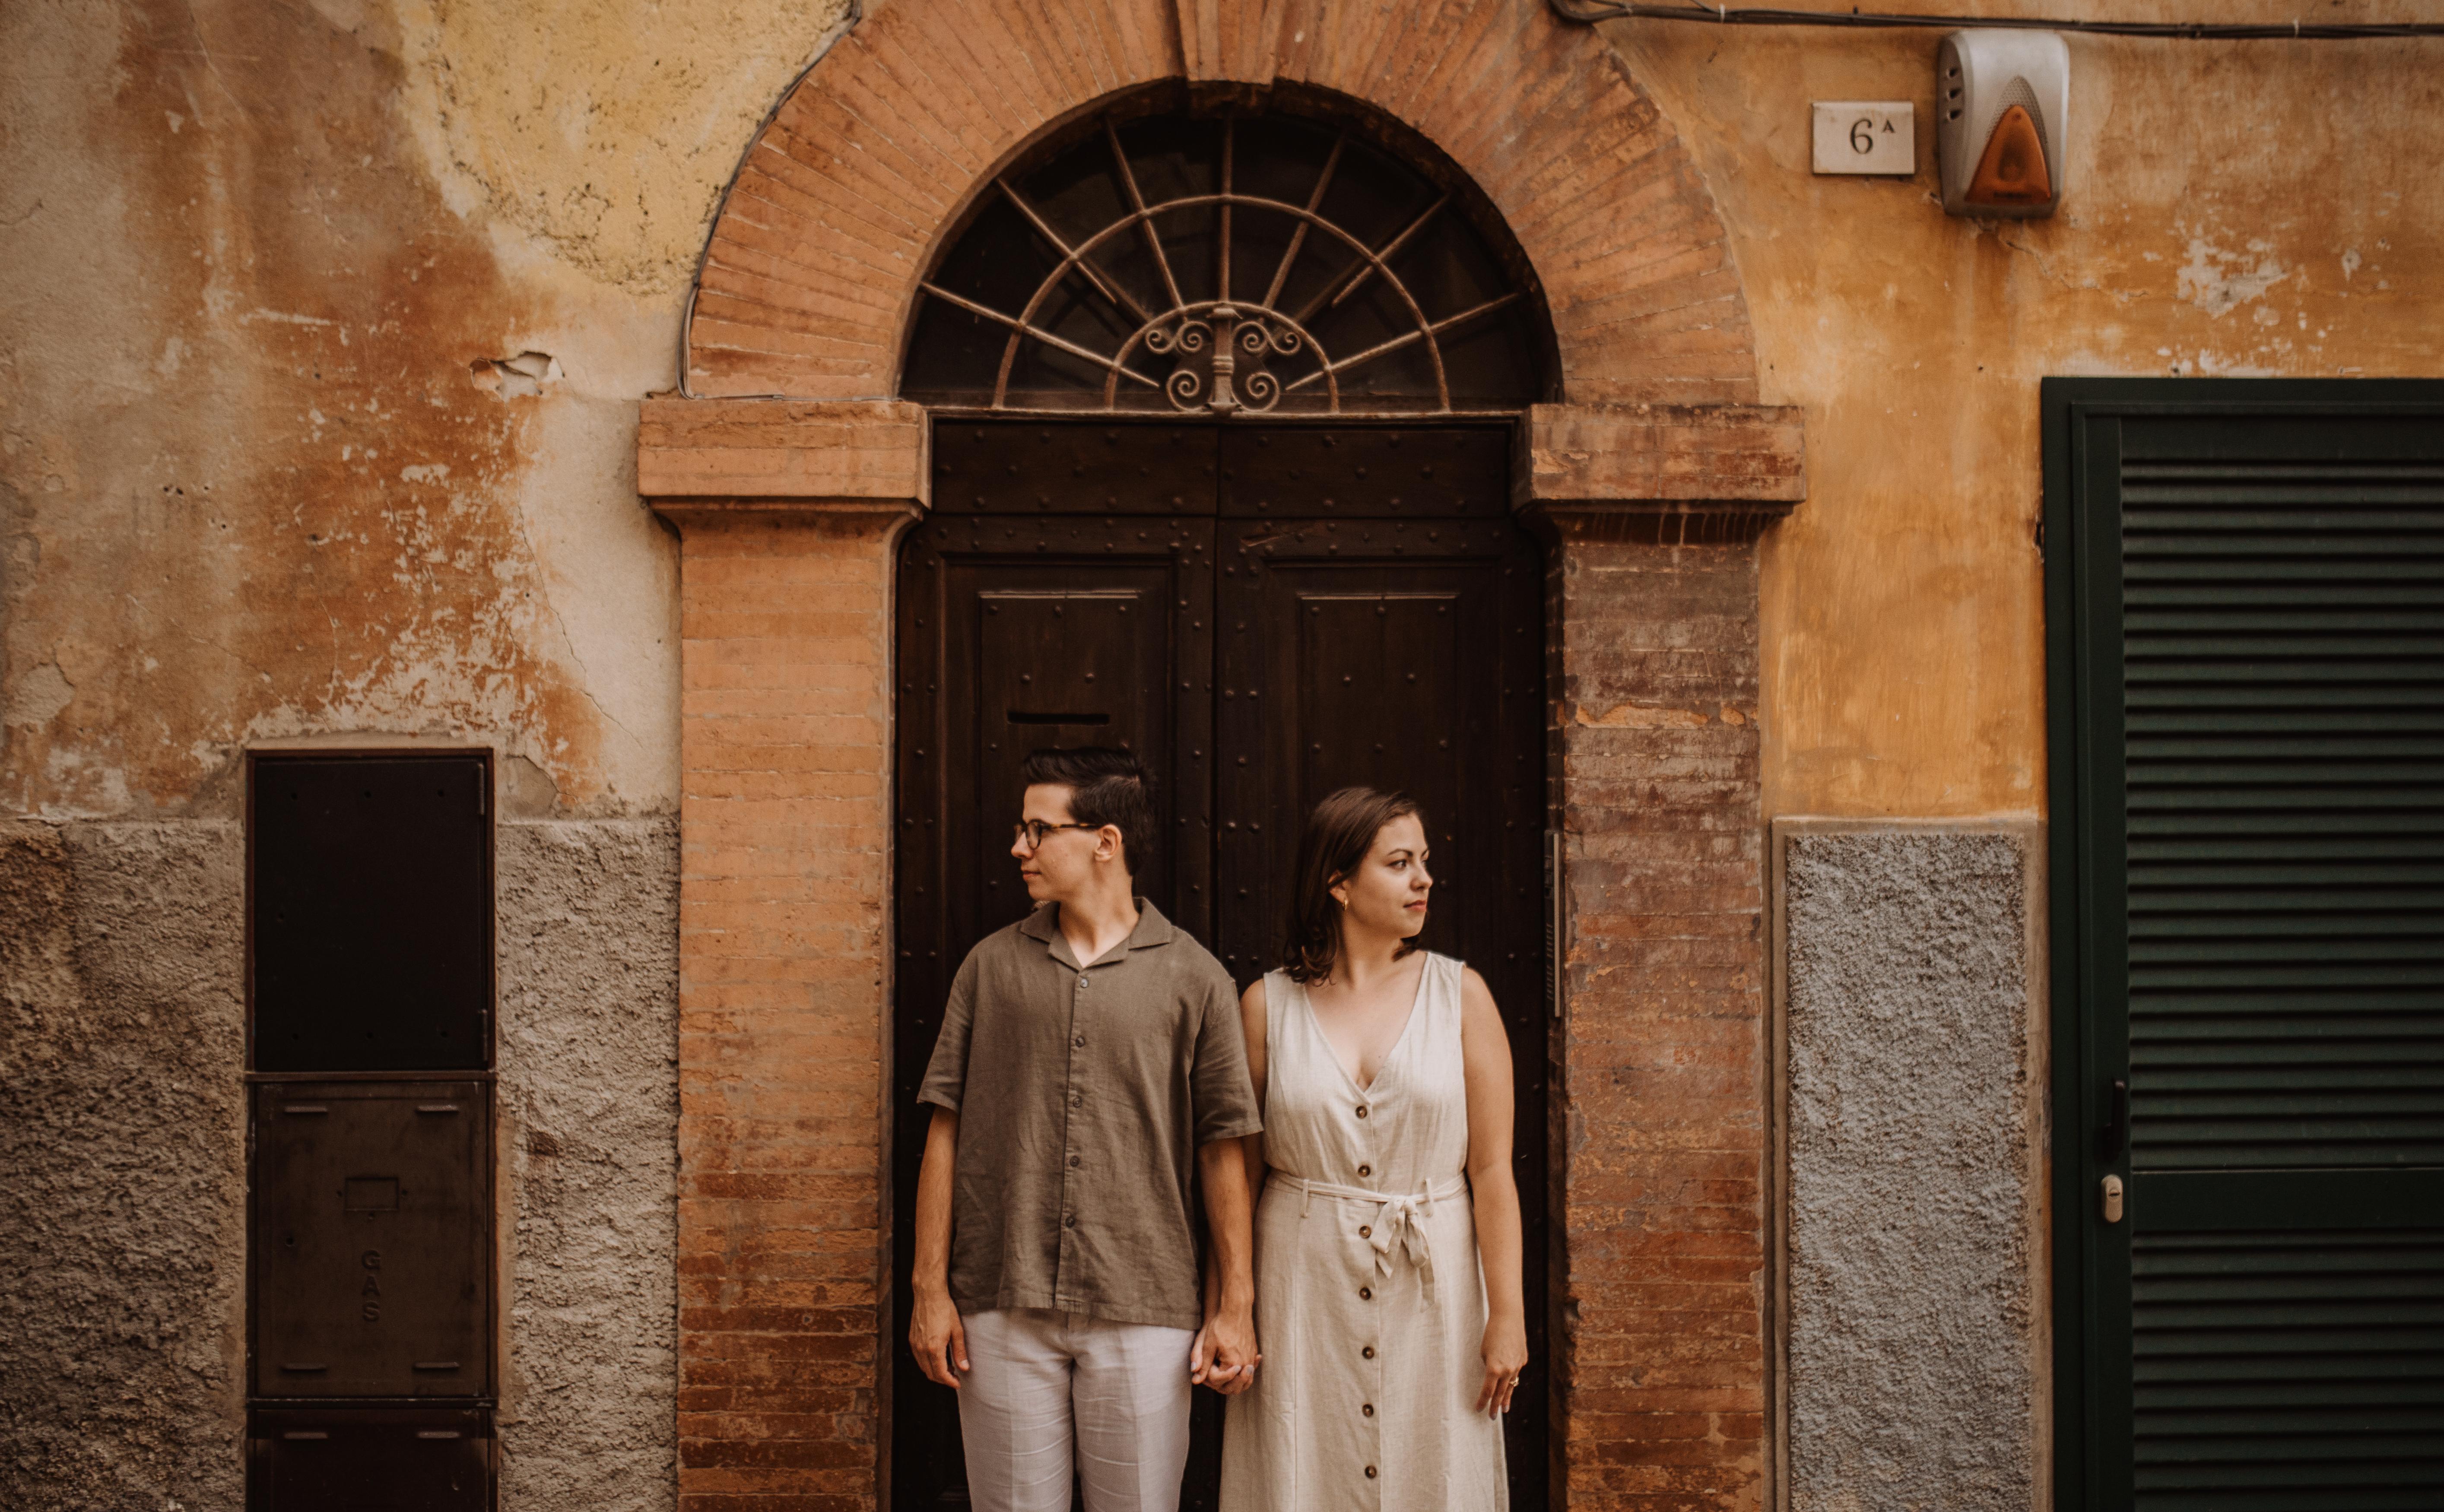 The Wedding Website of Jeanette Handy and Flavio Di Stefano